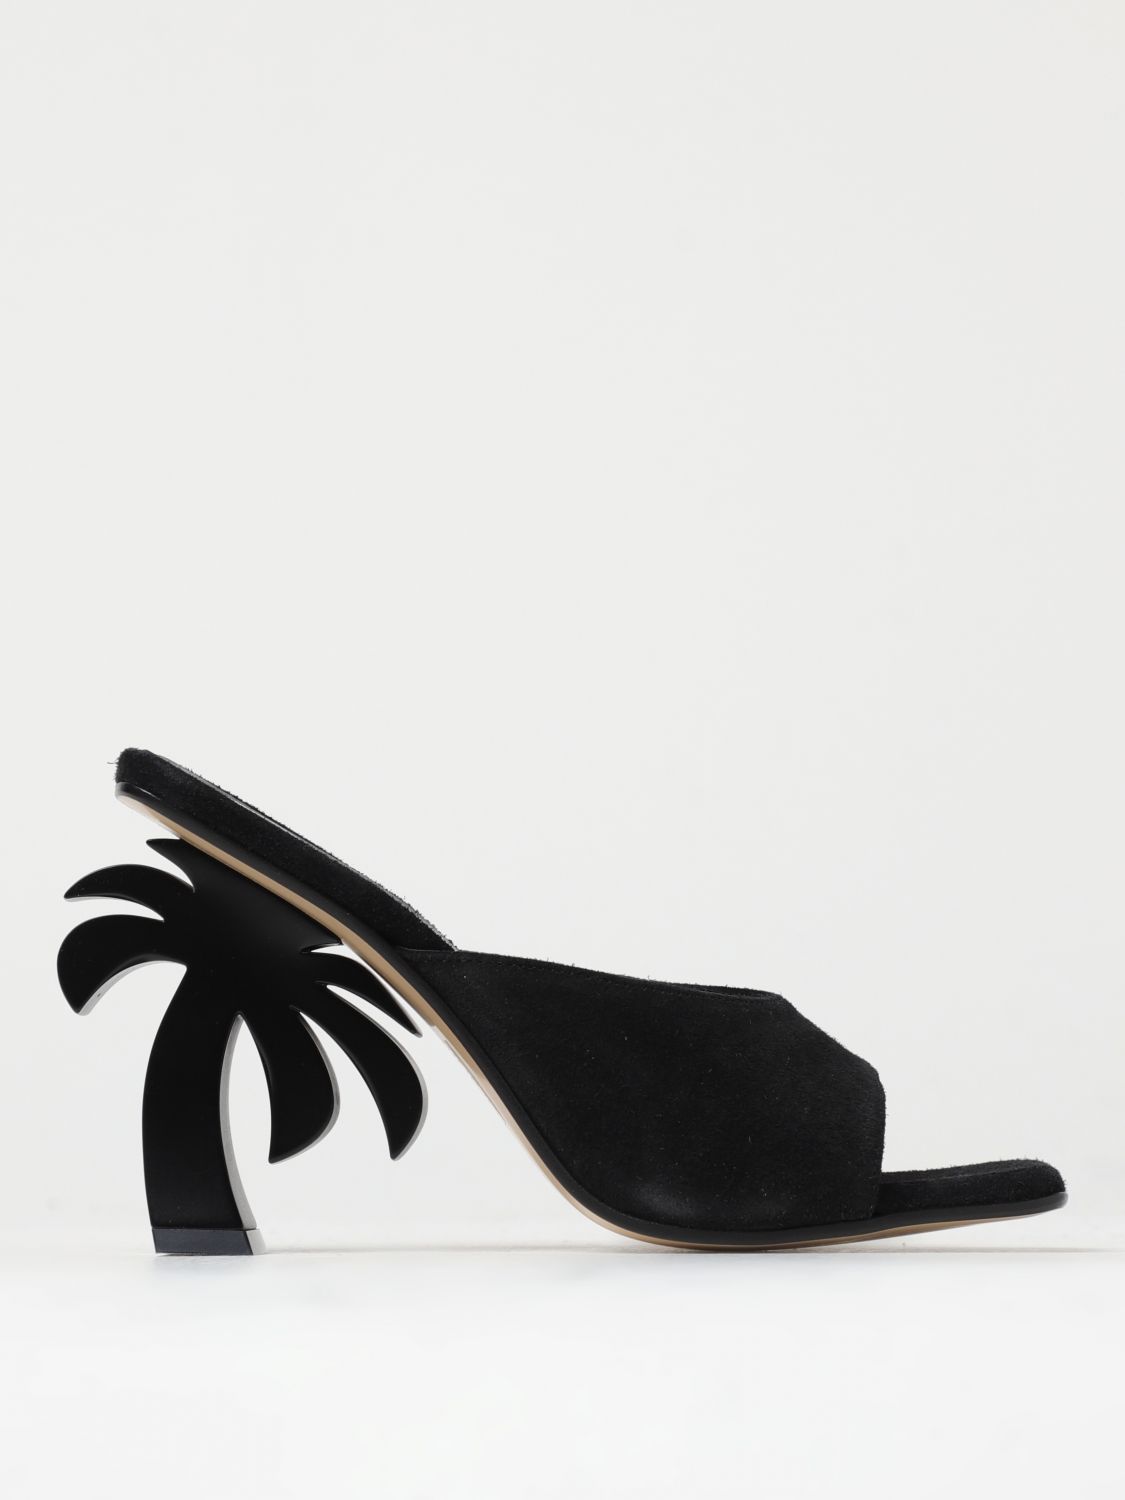 PALM ANGELS SANDALS IN SUEDE,E89807002